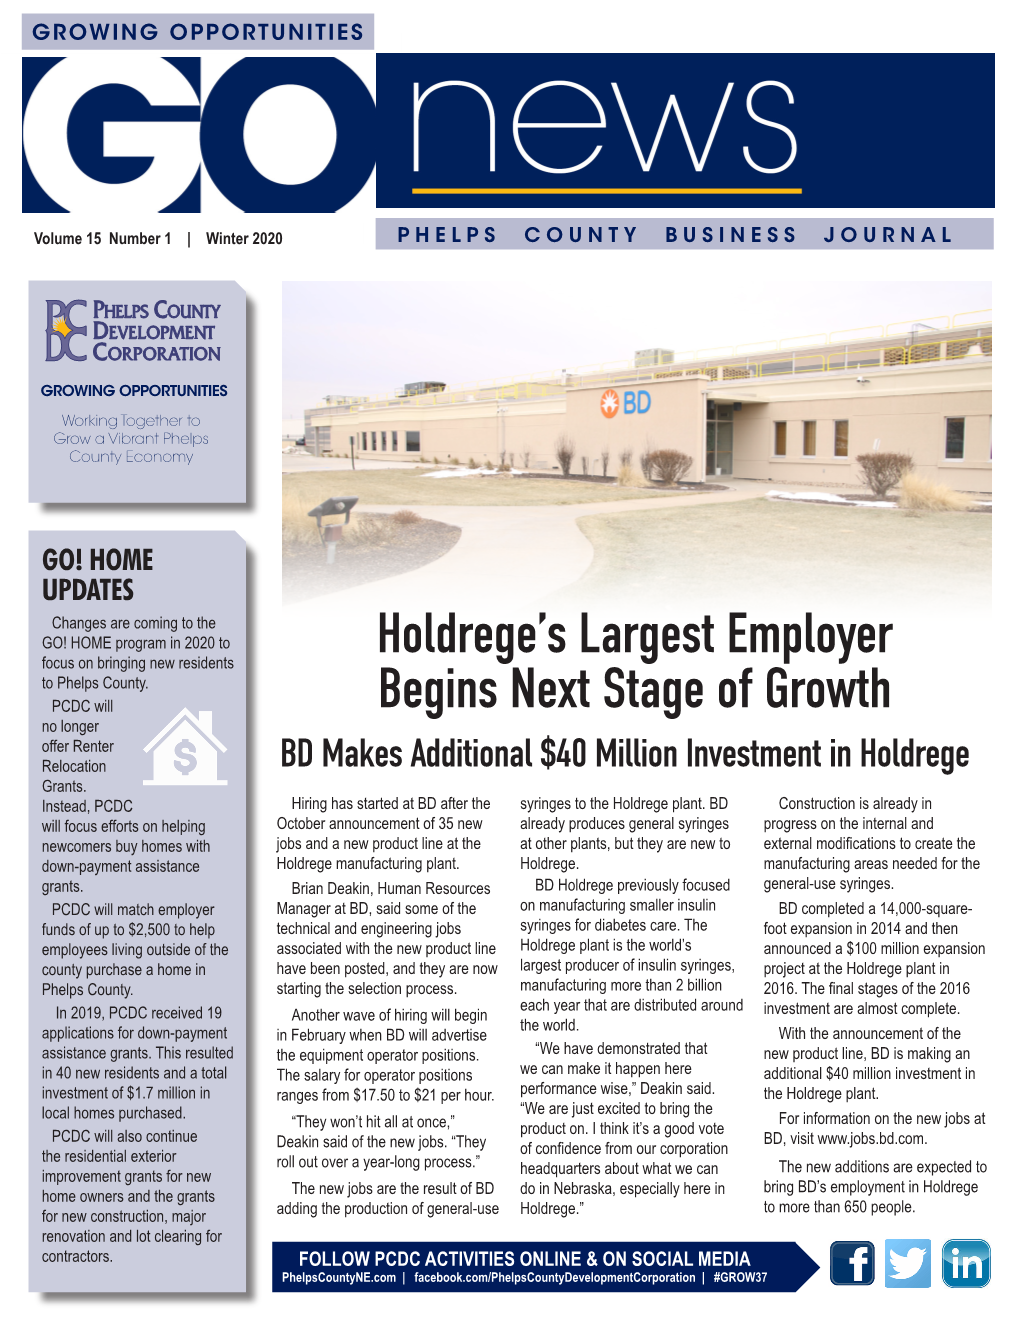 Holdrege's Largest Employer Begins Next Stage of Growth